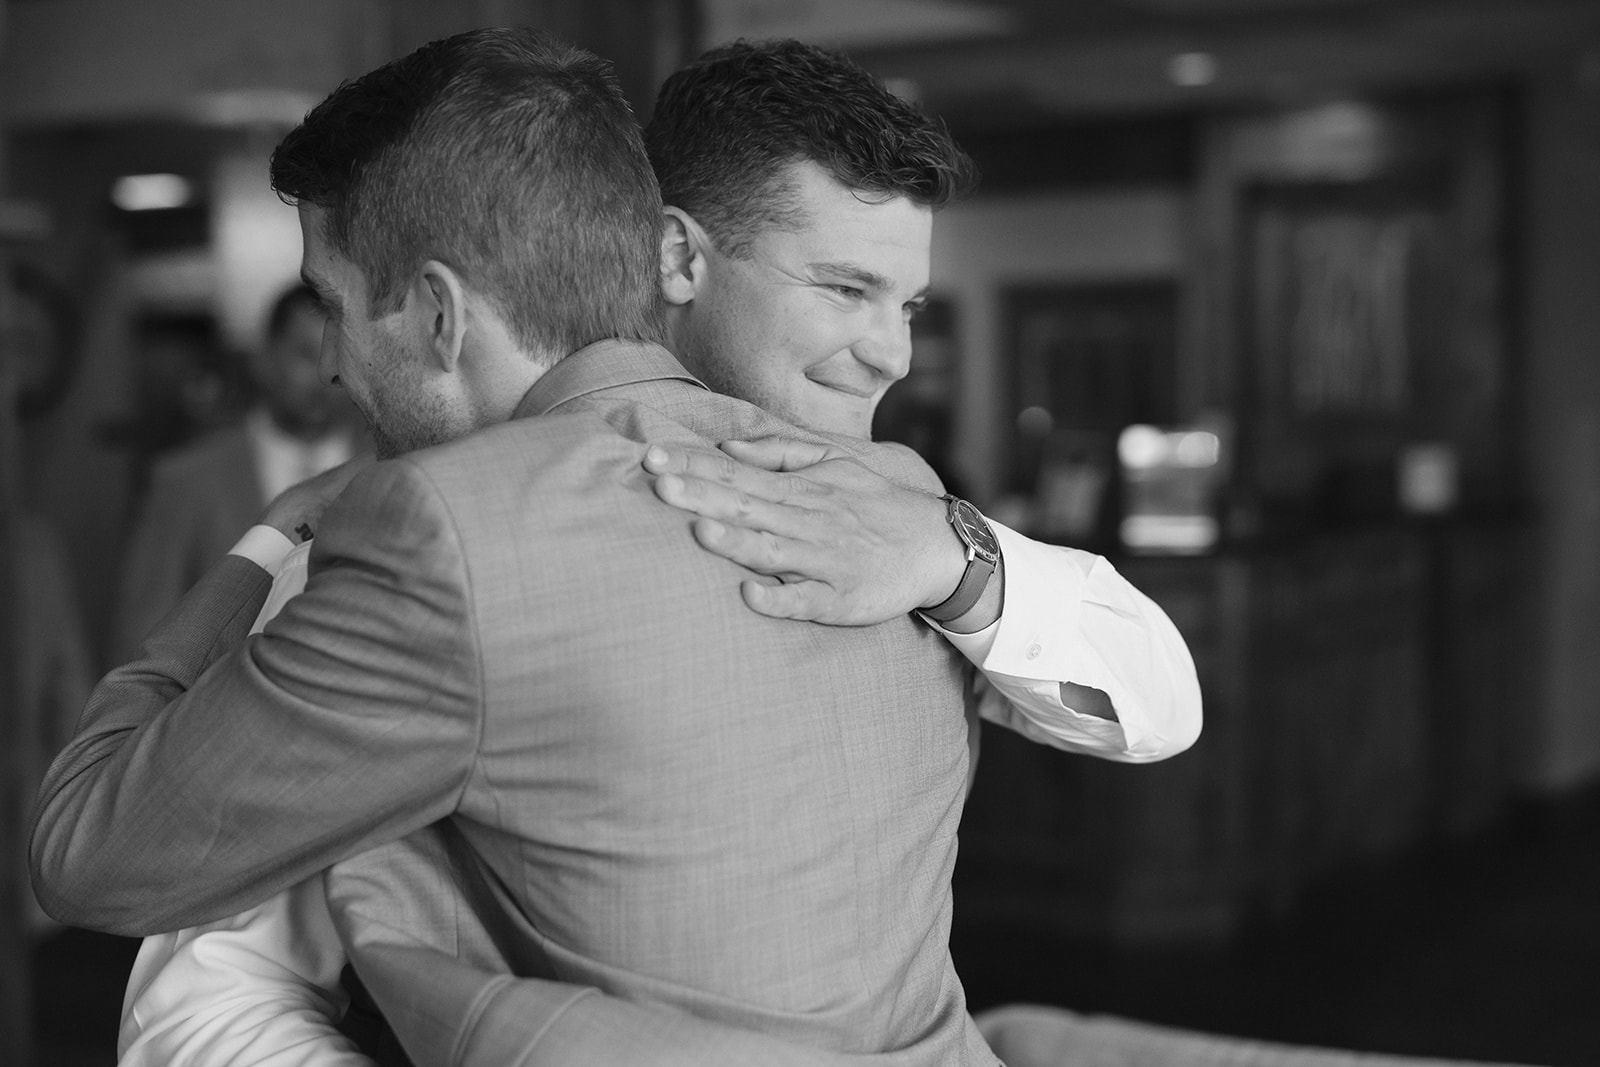 groom and man hug each other during getting ready photos